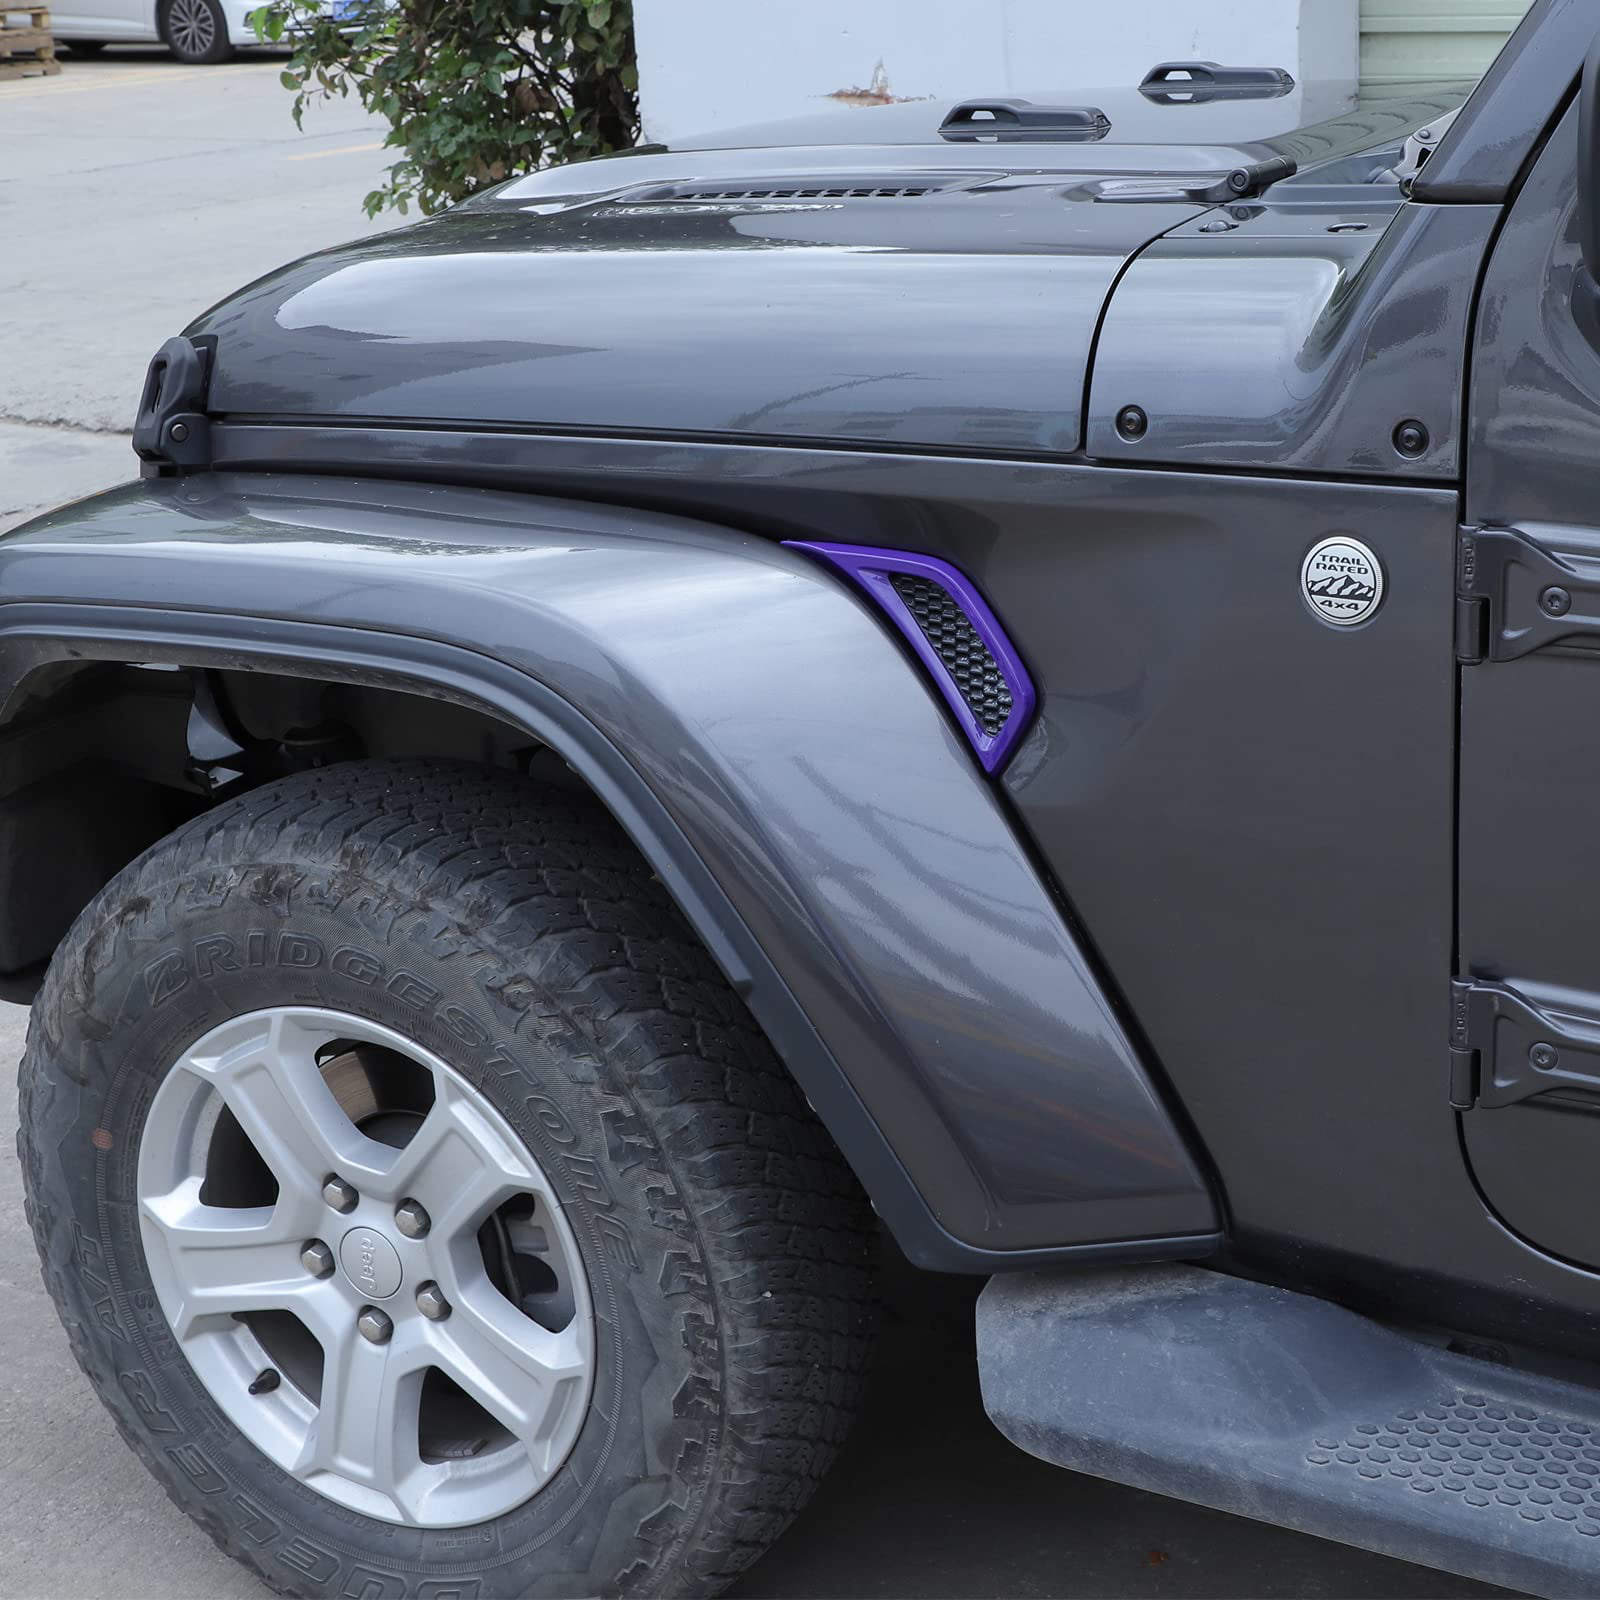 RT-TCZ for Jeep Wrangler Accessories, Exterior Wheel Eyebrow, Side Air  Conditioning Hood Vent Outlet Cover Trim, ABS for Jeep Wrangler 2018-2022  JL JLU  JT Gladiator 2PCS Purple